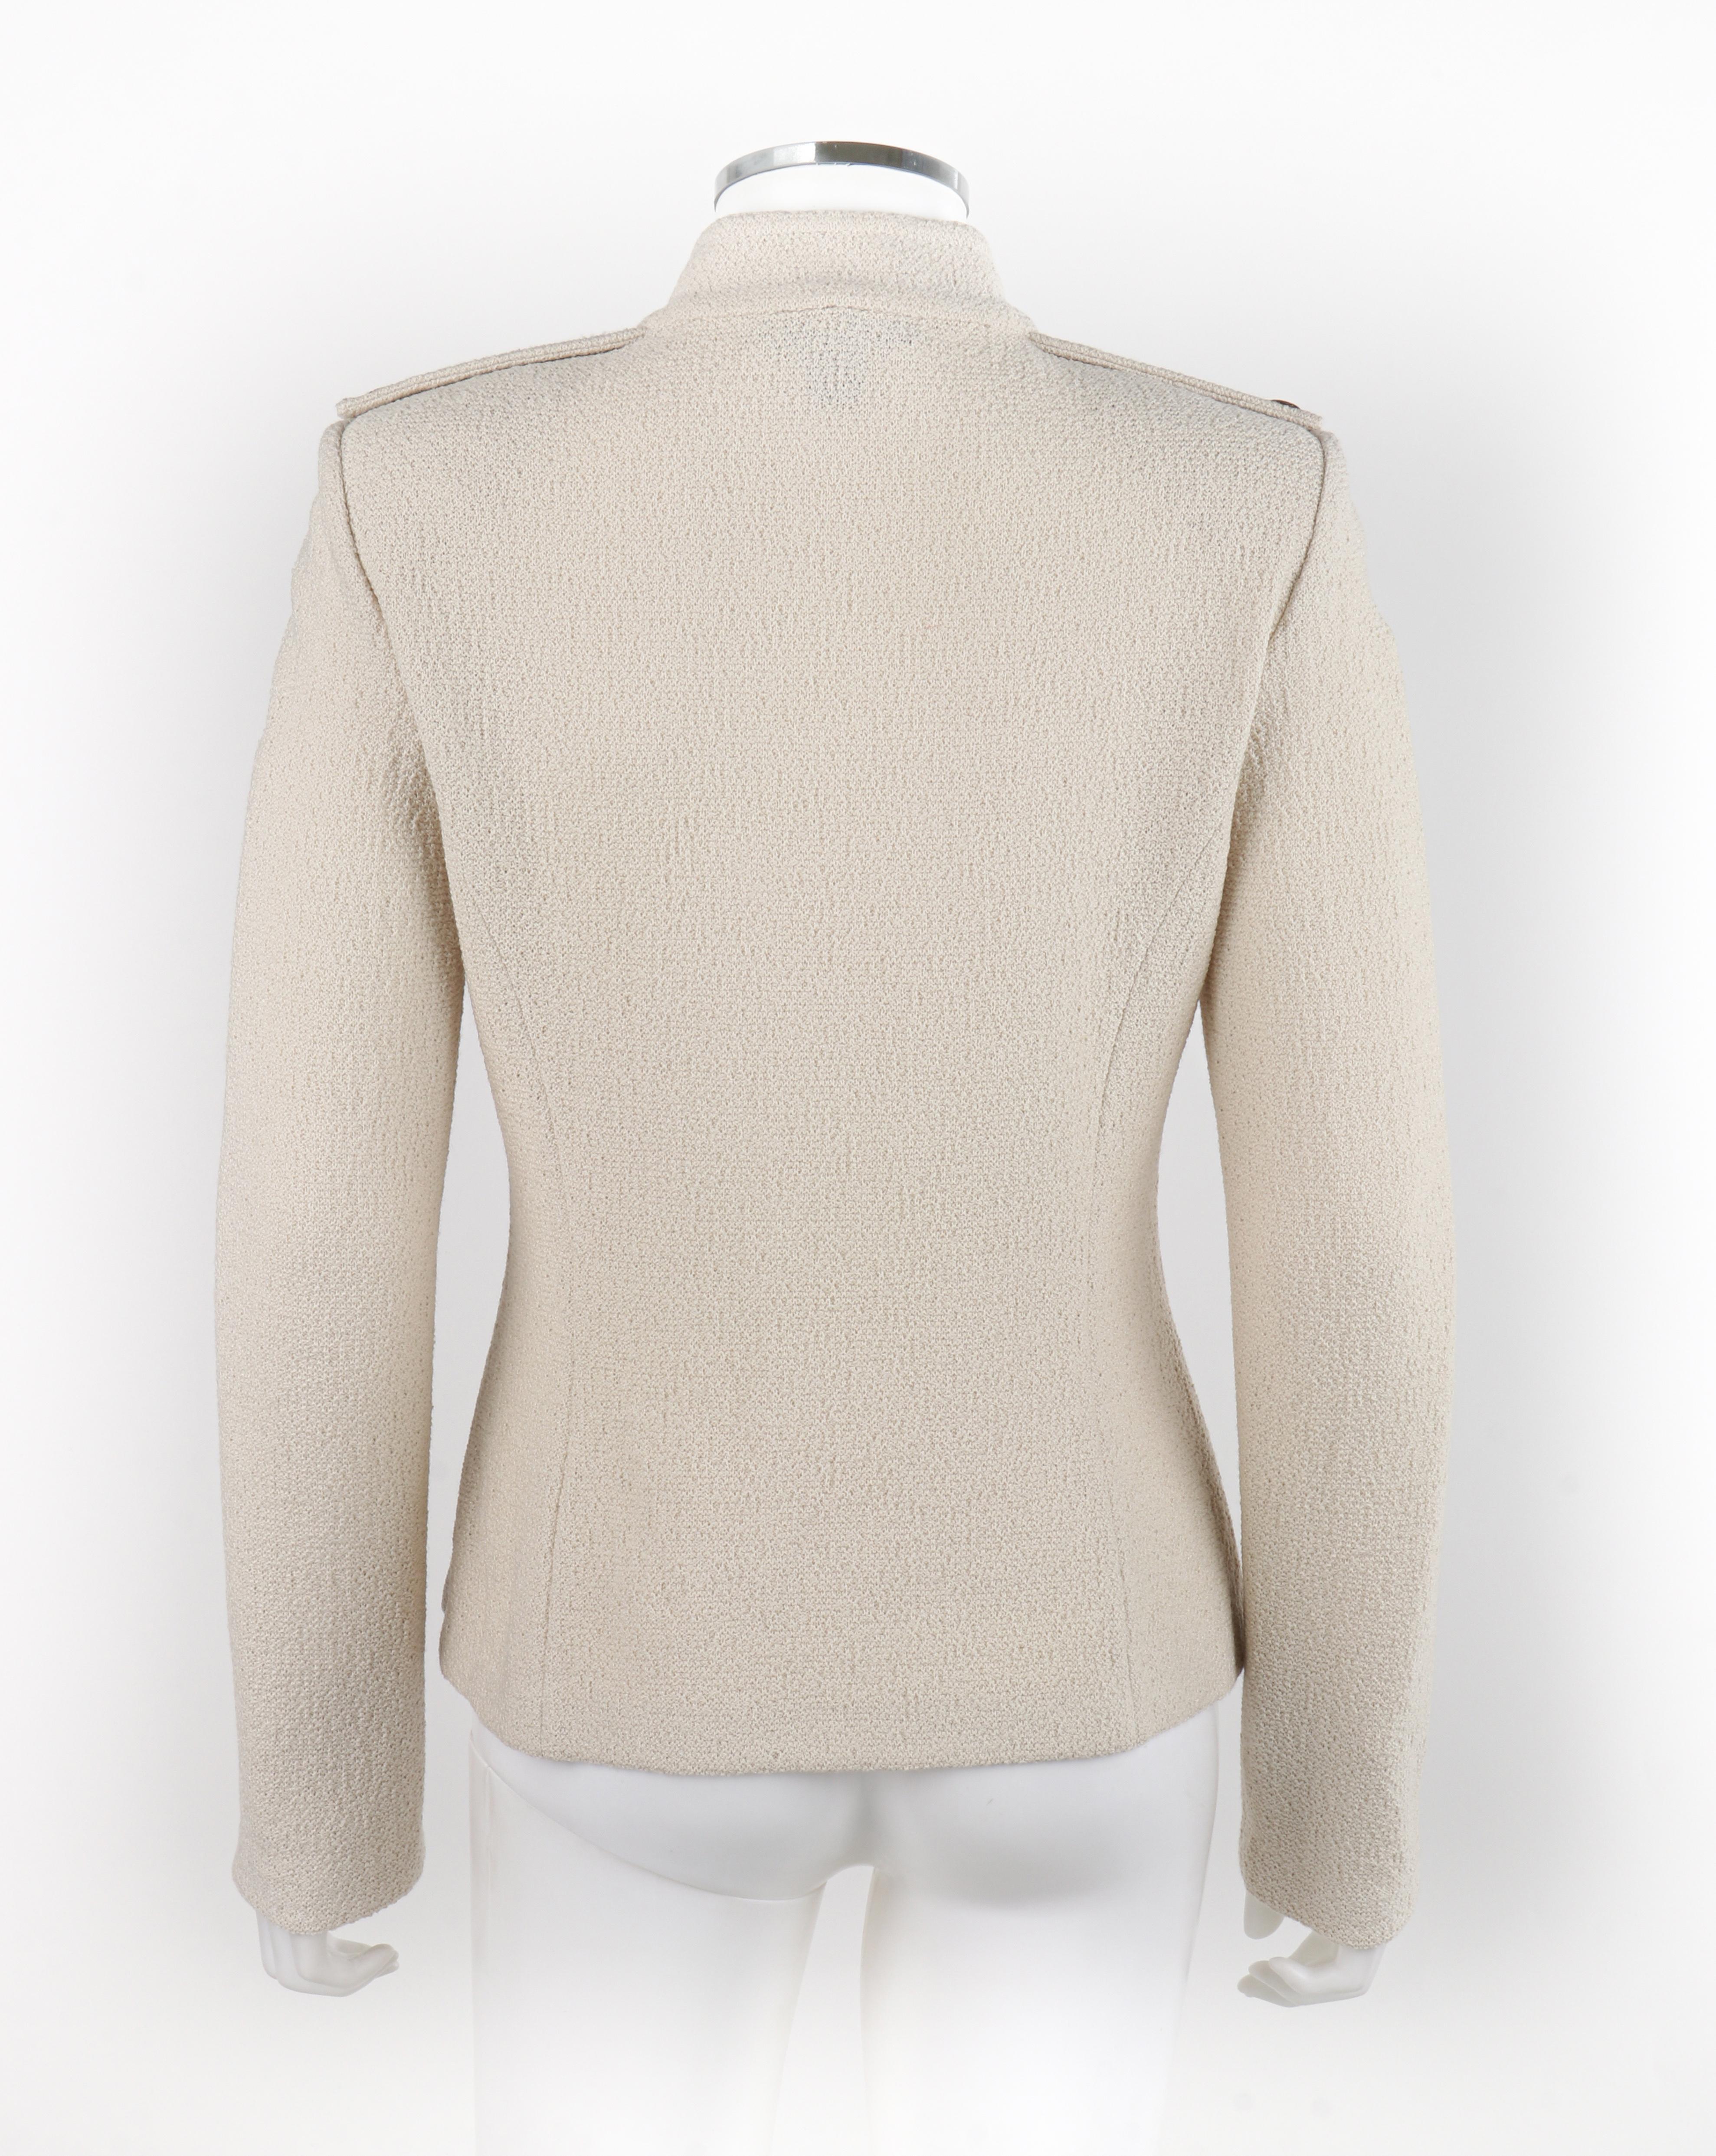 ST JOHN c.2010s Beige Knit Stand Collar Military Double-Breasted Blazer Jacket im Angebot 2